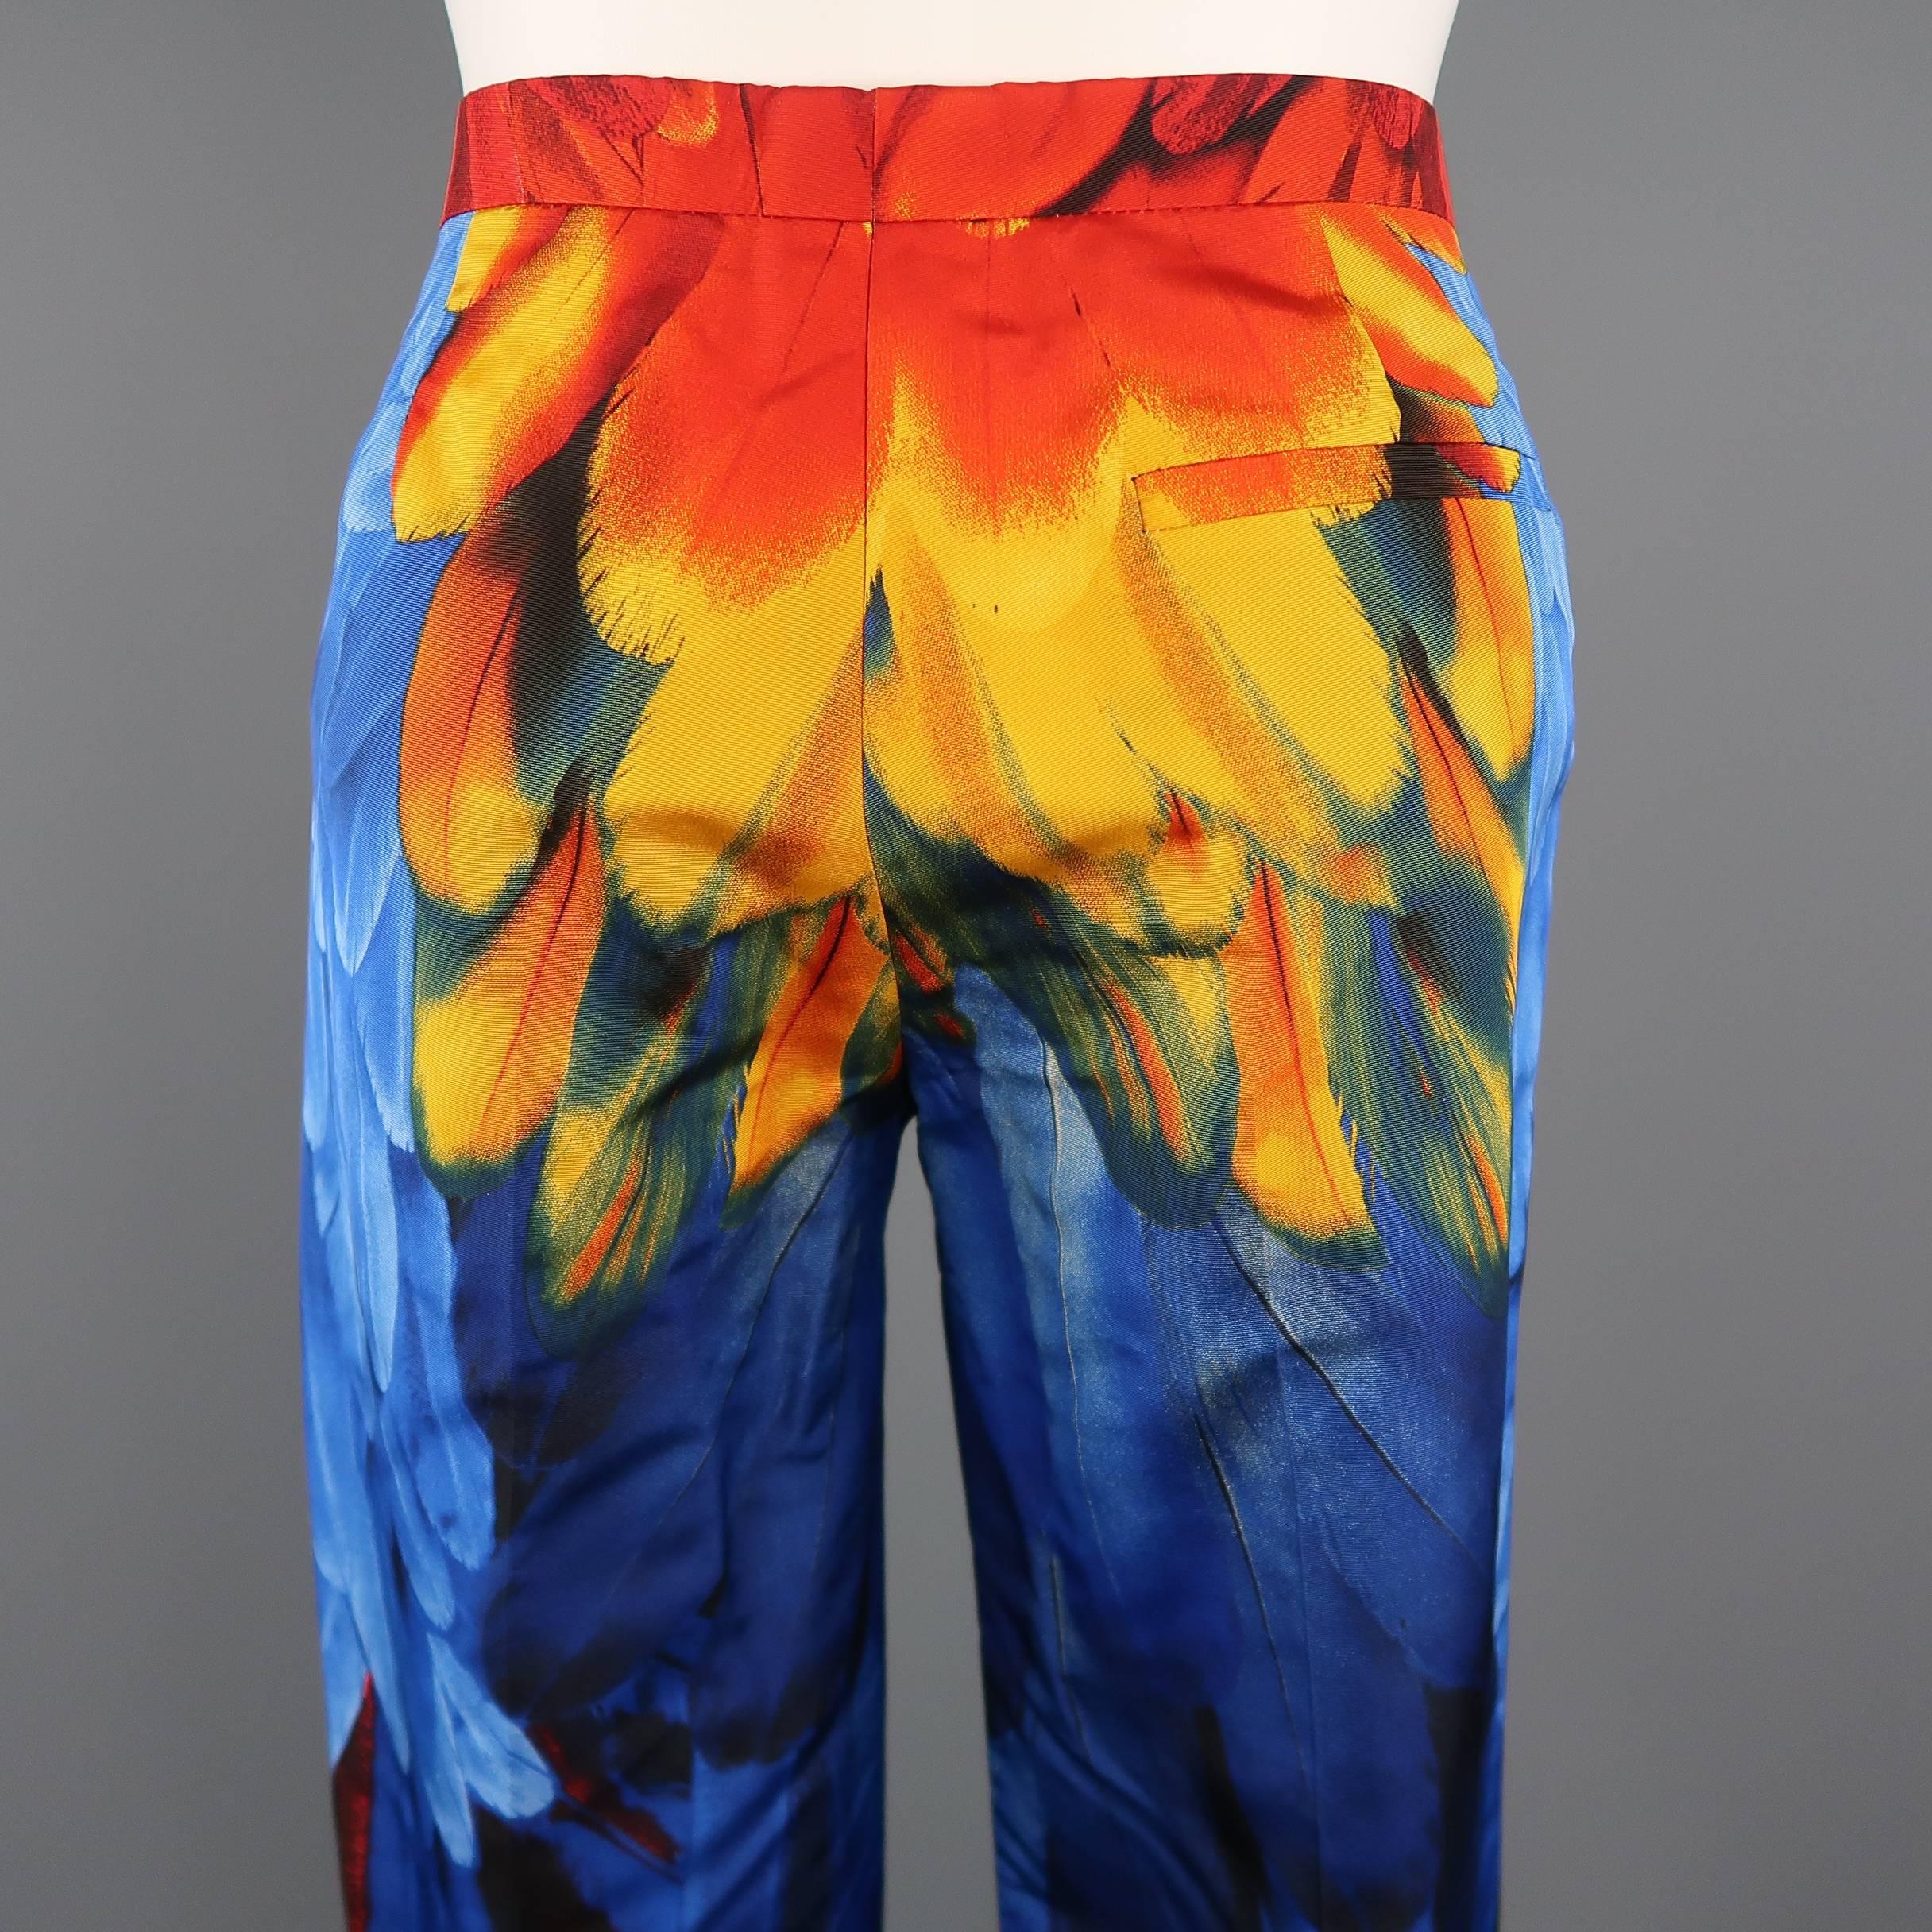 PRADA Pants - Spring 2005 Runway - Blue Red, Yellow Parrot Feather Silk Faille 2